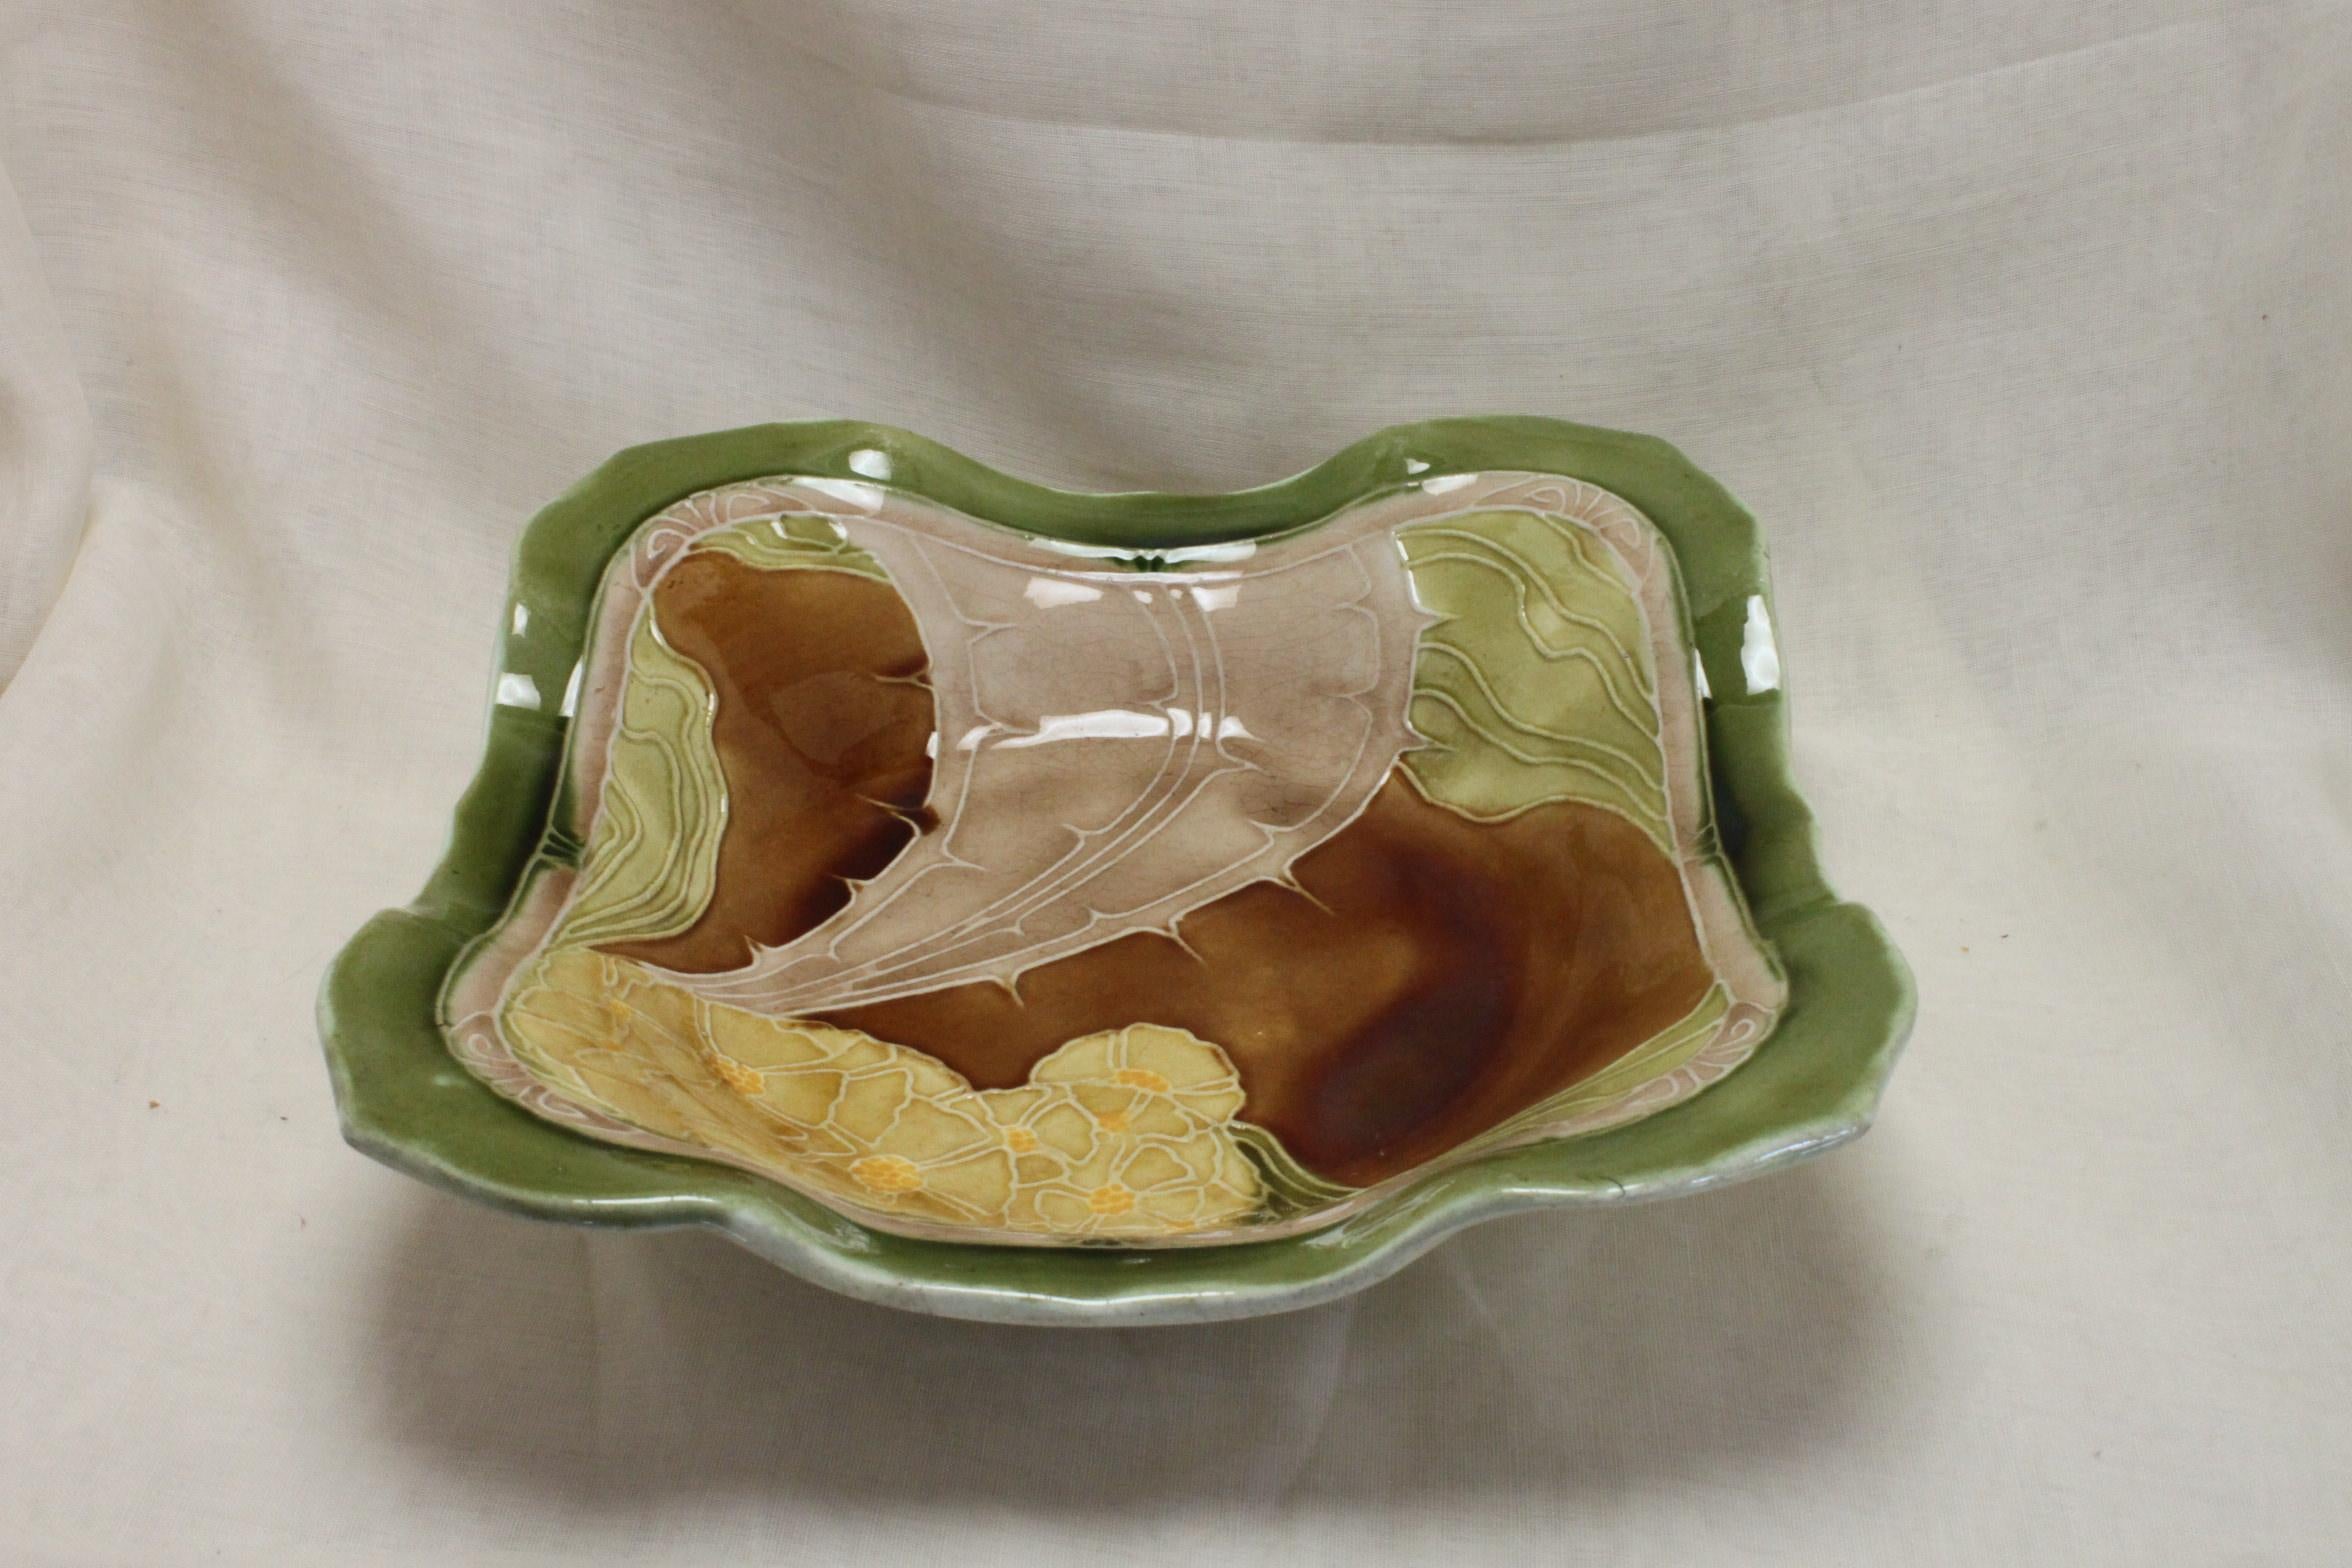 This Minton fruit bowl is from their 